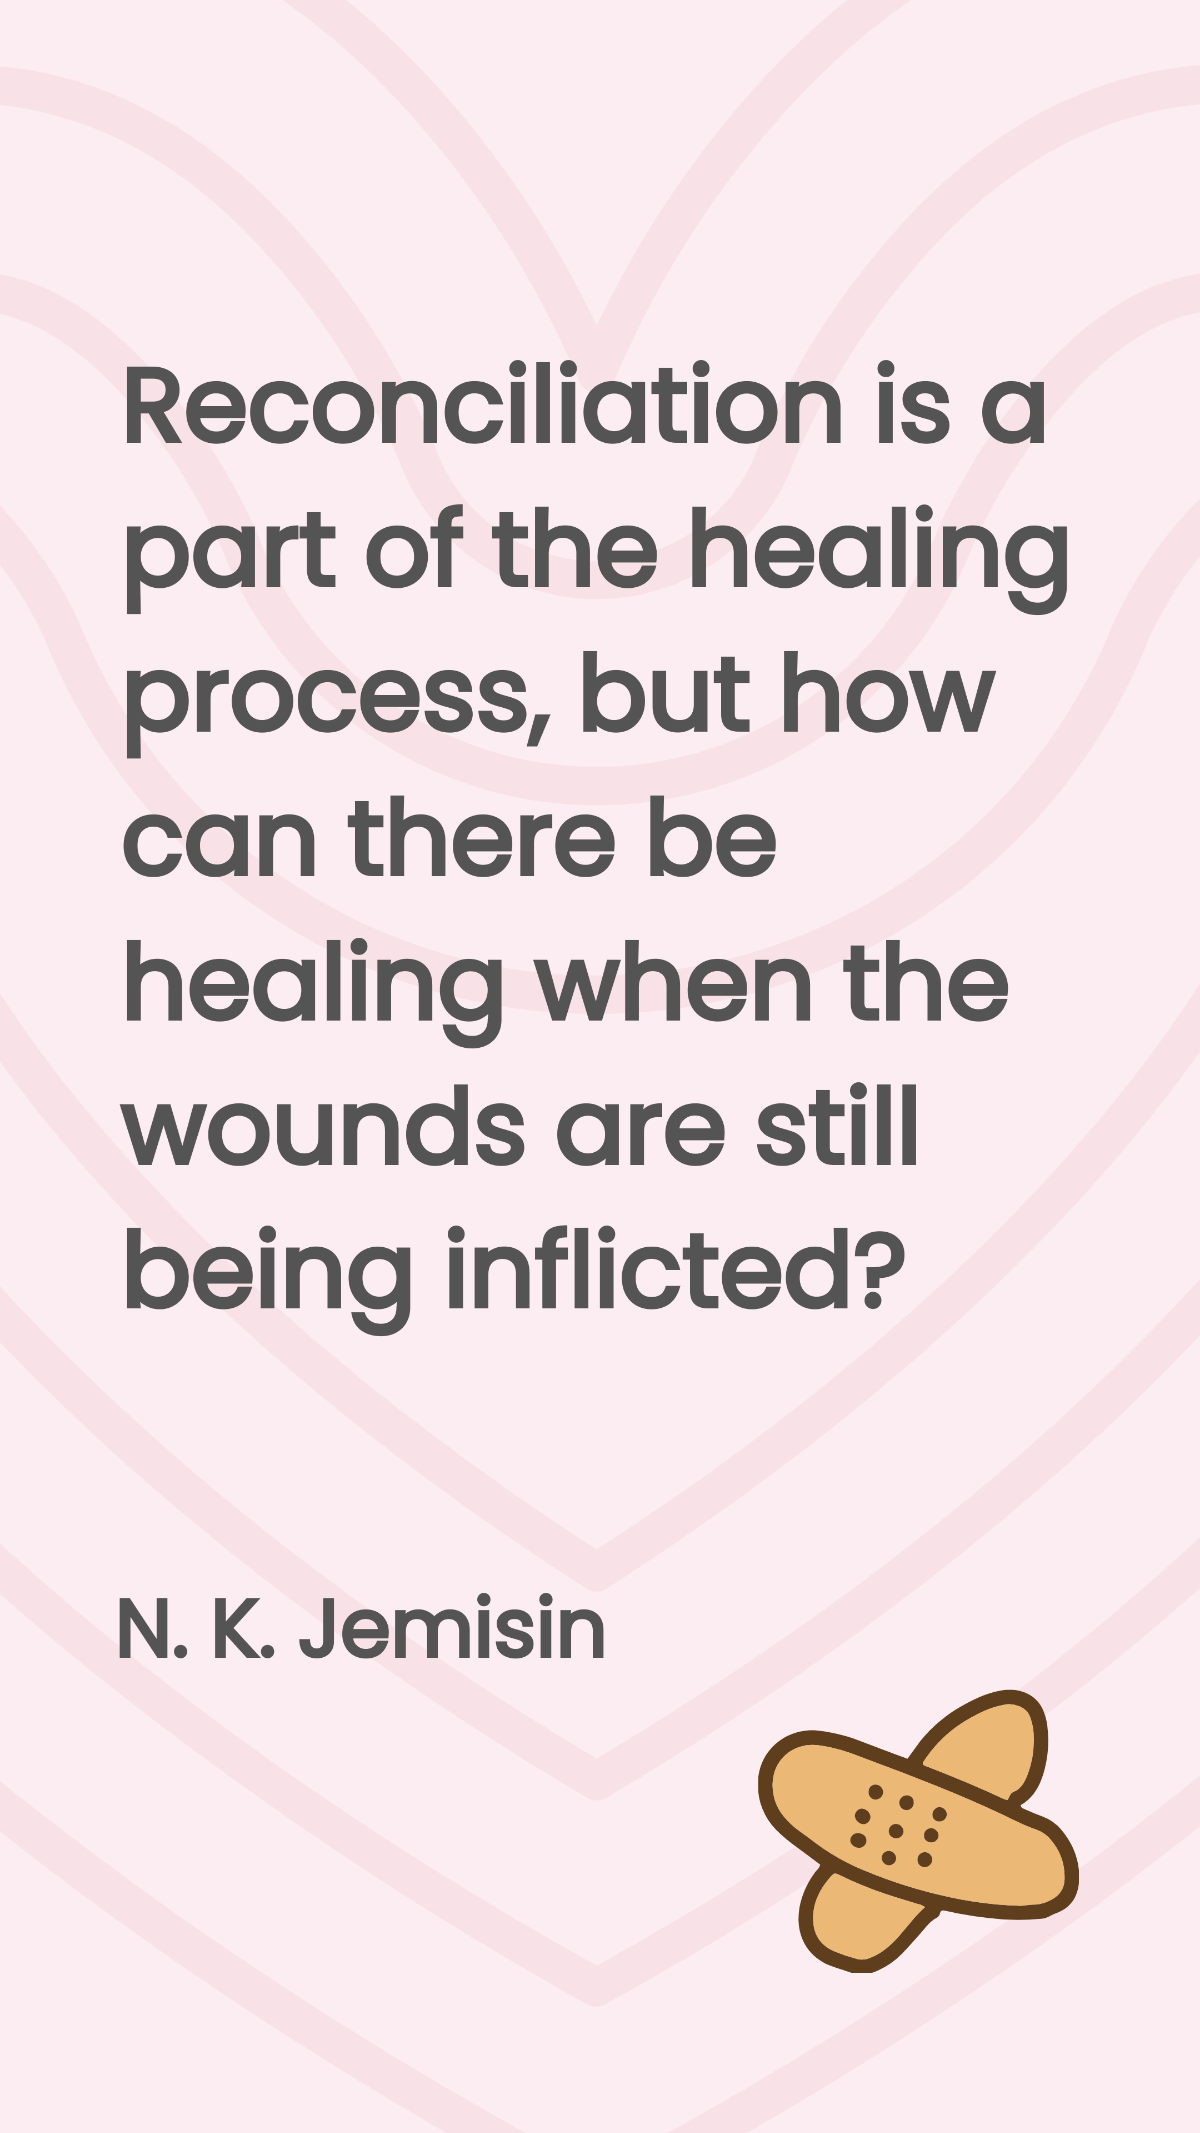 N. K. Jemisin - Reconciliation is a part of the healing process, but how can there be healing when the wounds are still being inflicted? Template